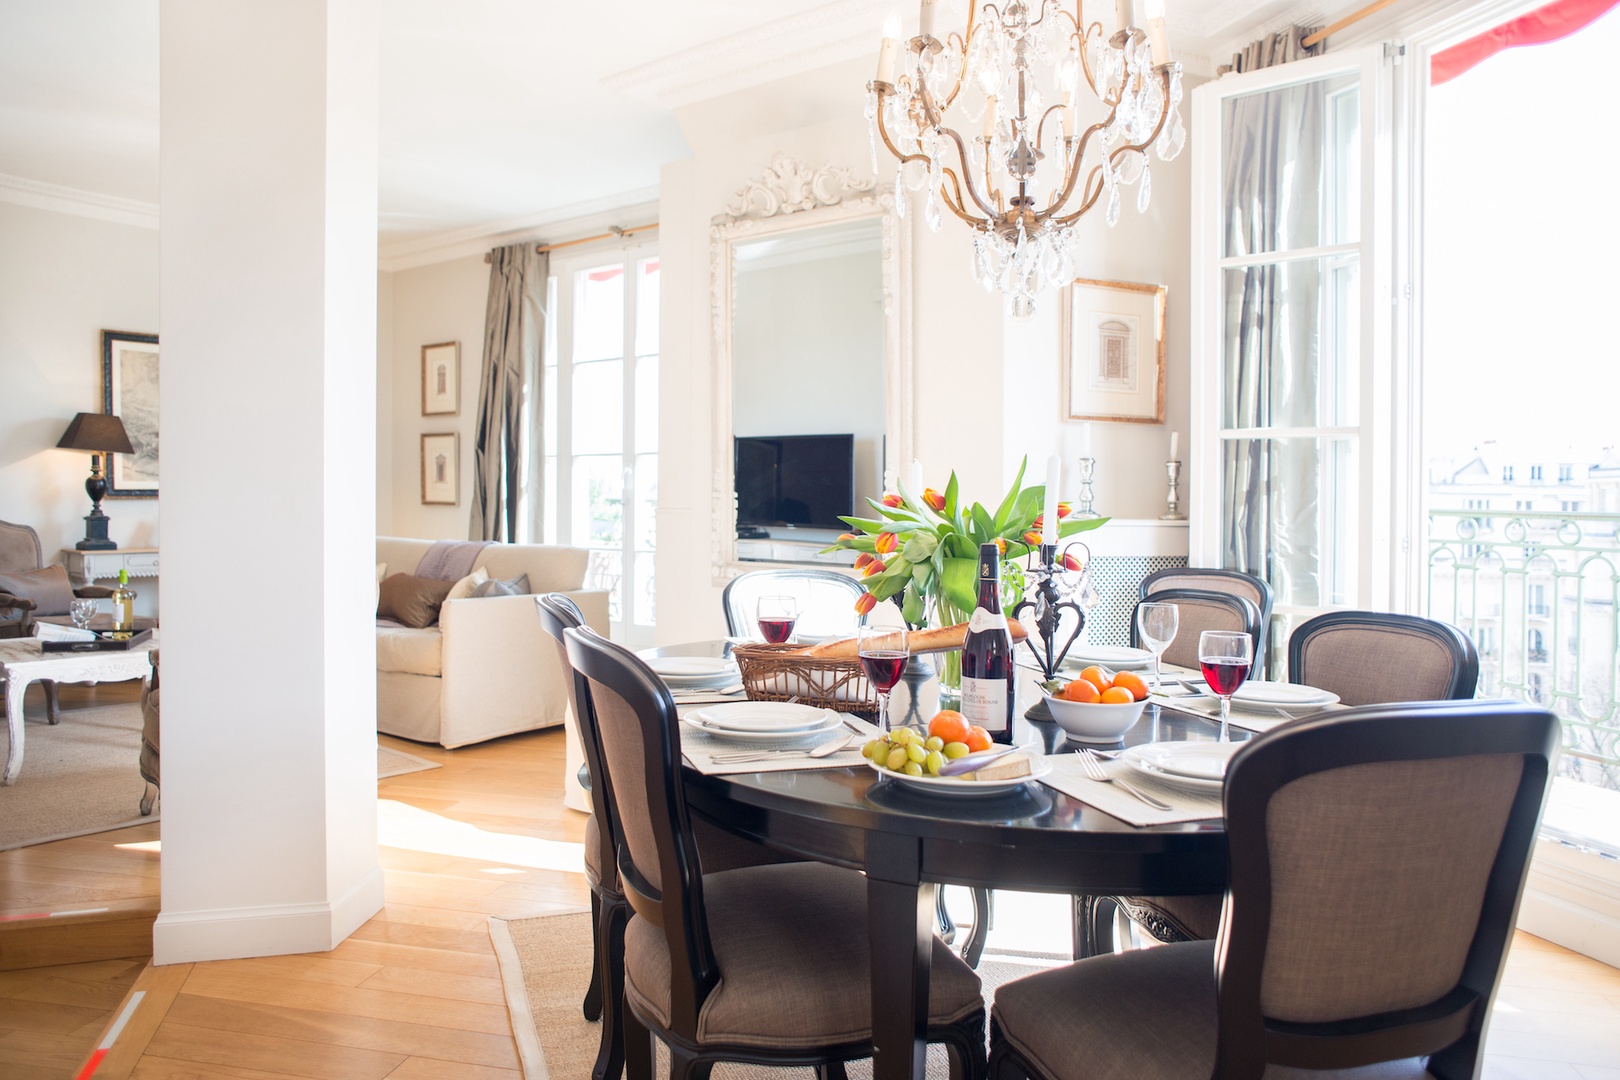 The dining table near the French doors seats up to six guests.